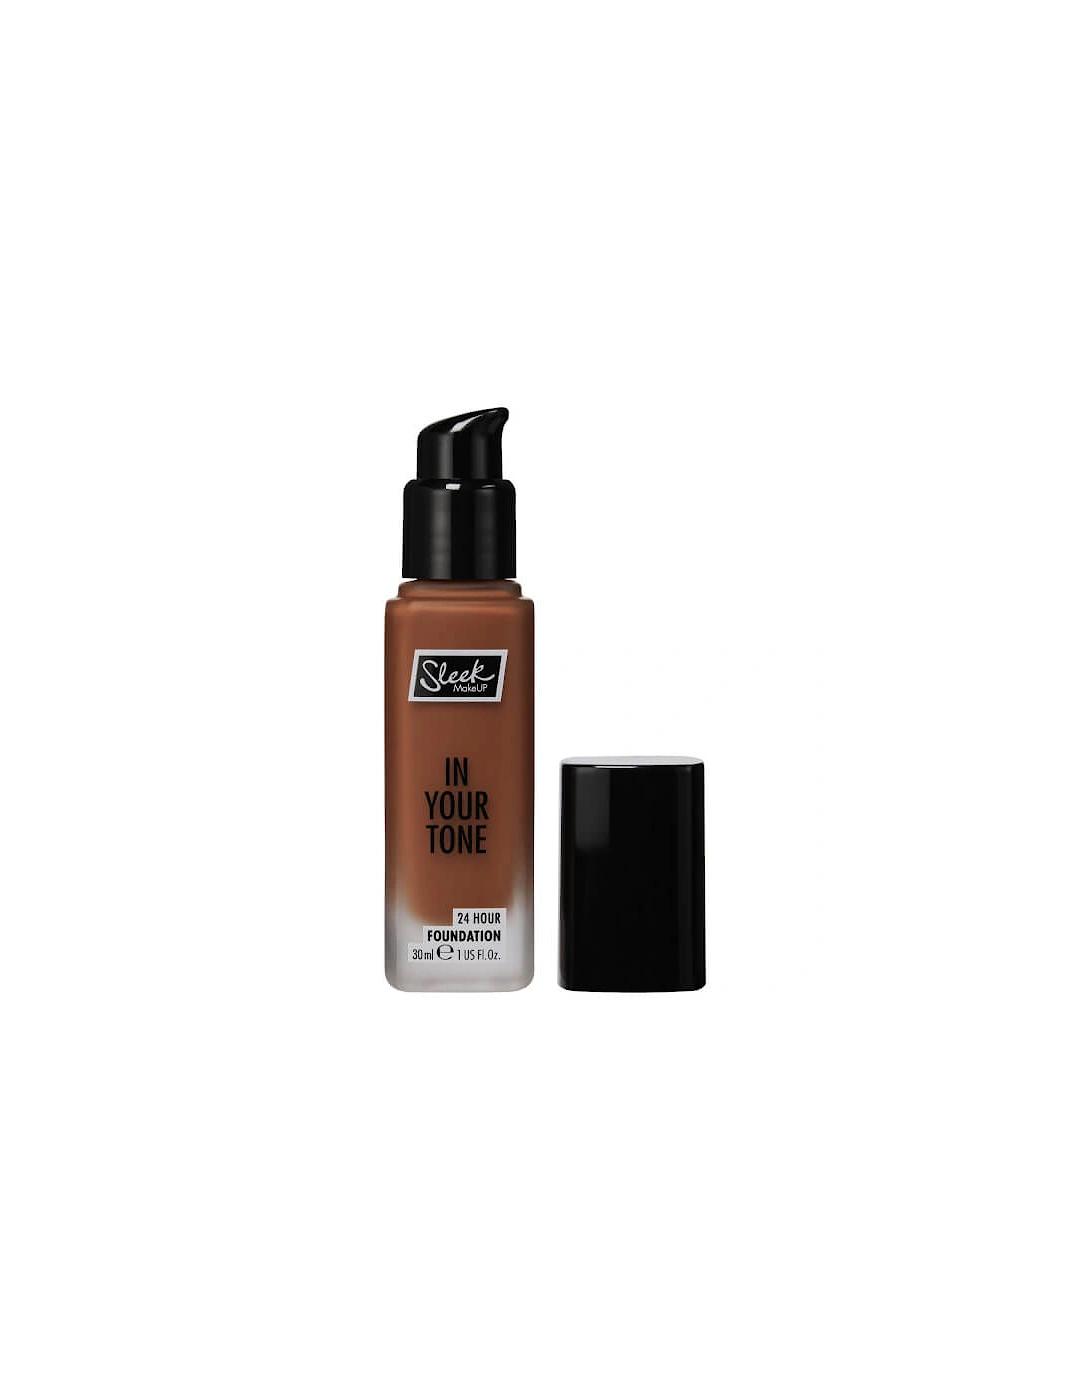 in Your Tone 24 Hour Foundation - 11N, 2 of 1